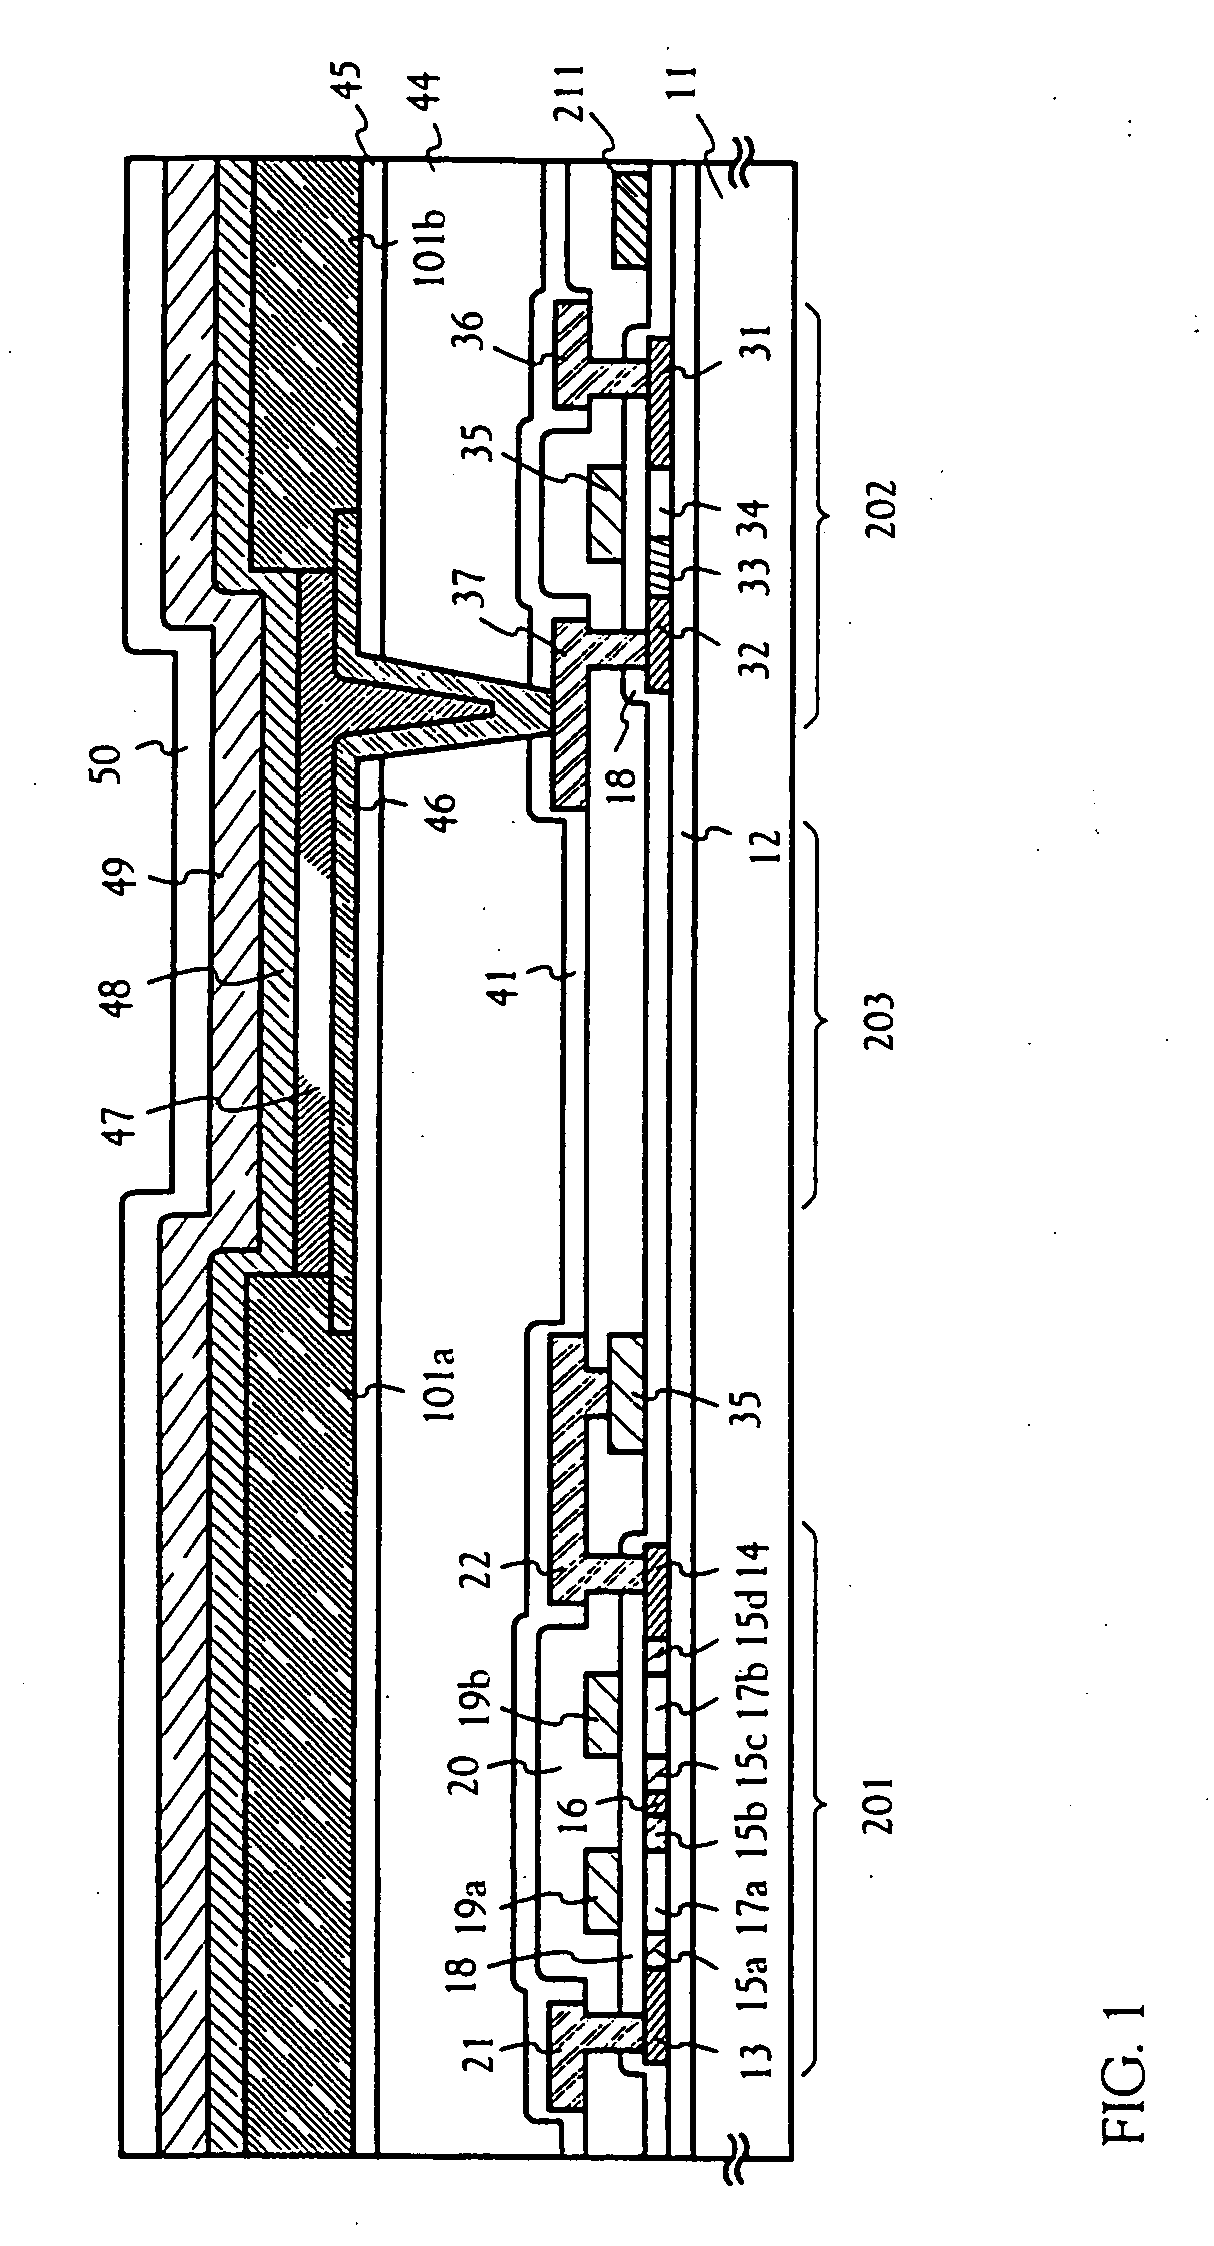 Method for manufacturing an electro-optical device